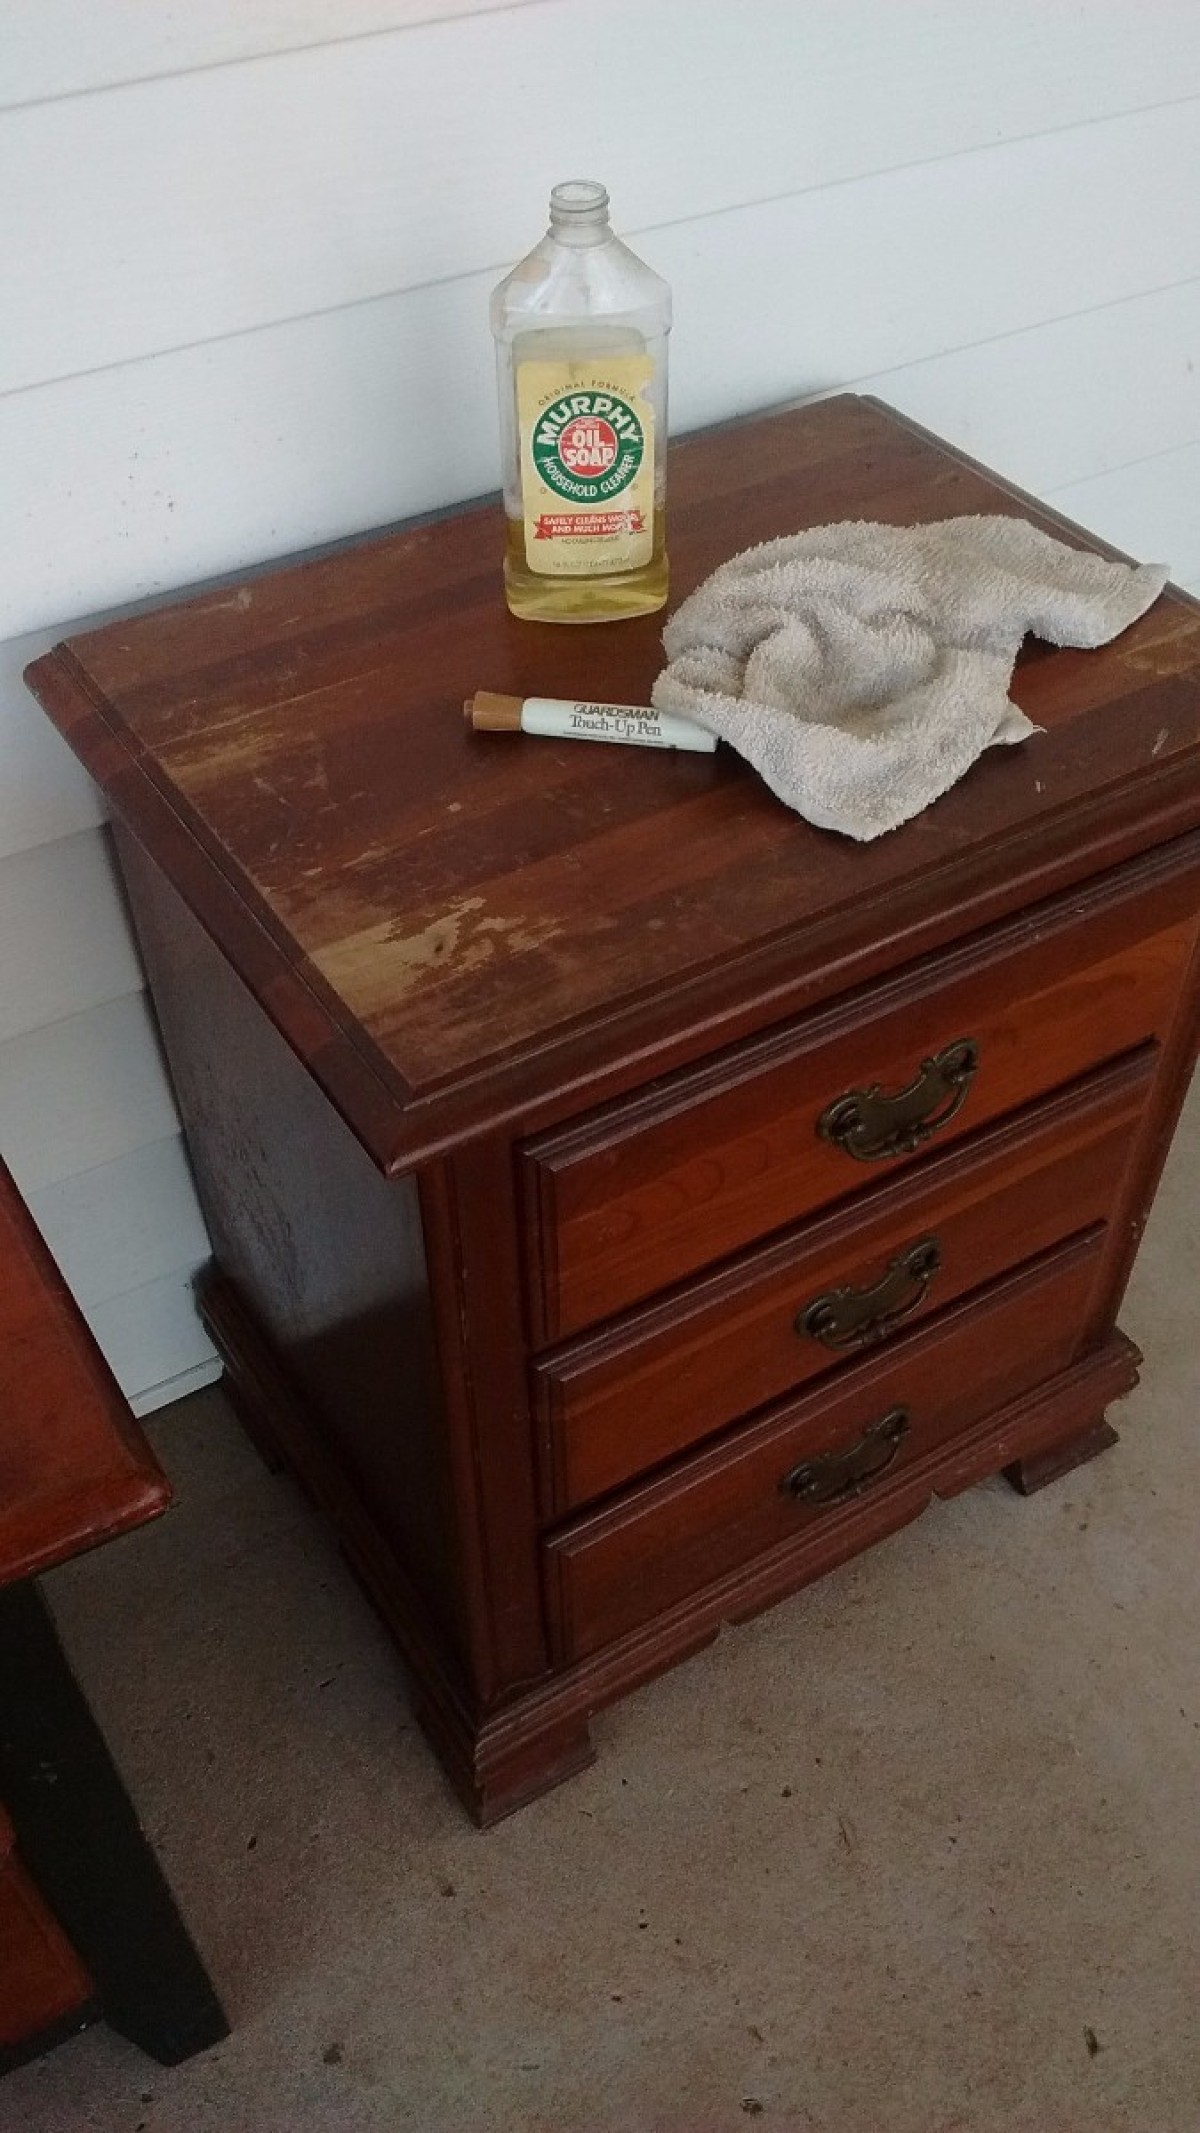 How To Fix Wood Furniture How to Fix Damaged Surfaces of Wood Furniture | ThriftyFun